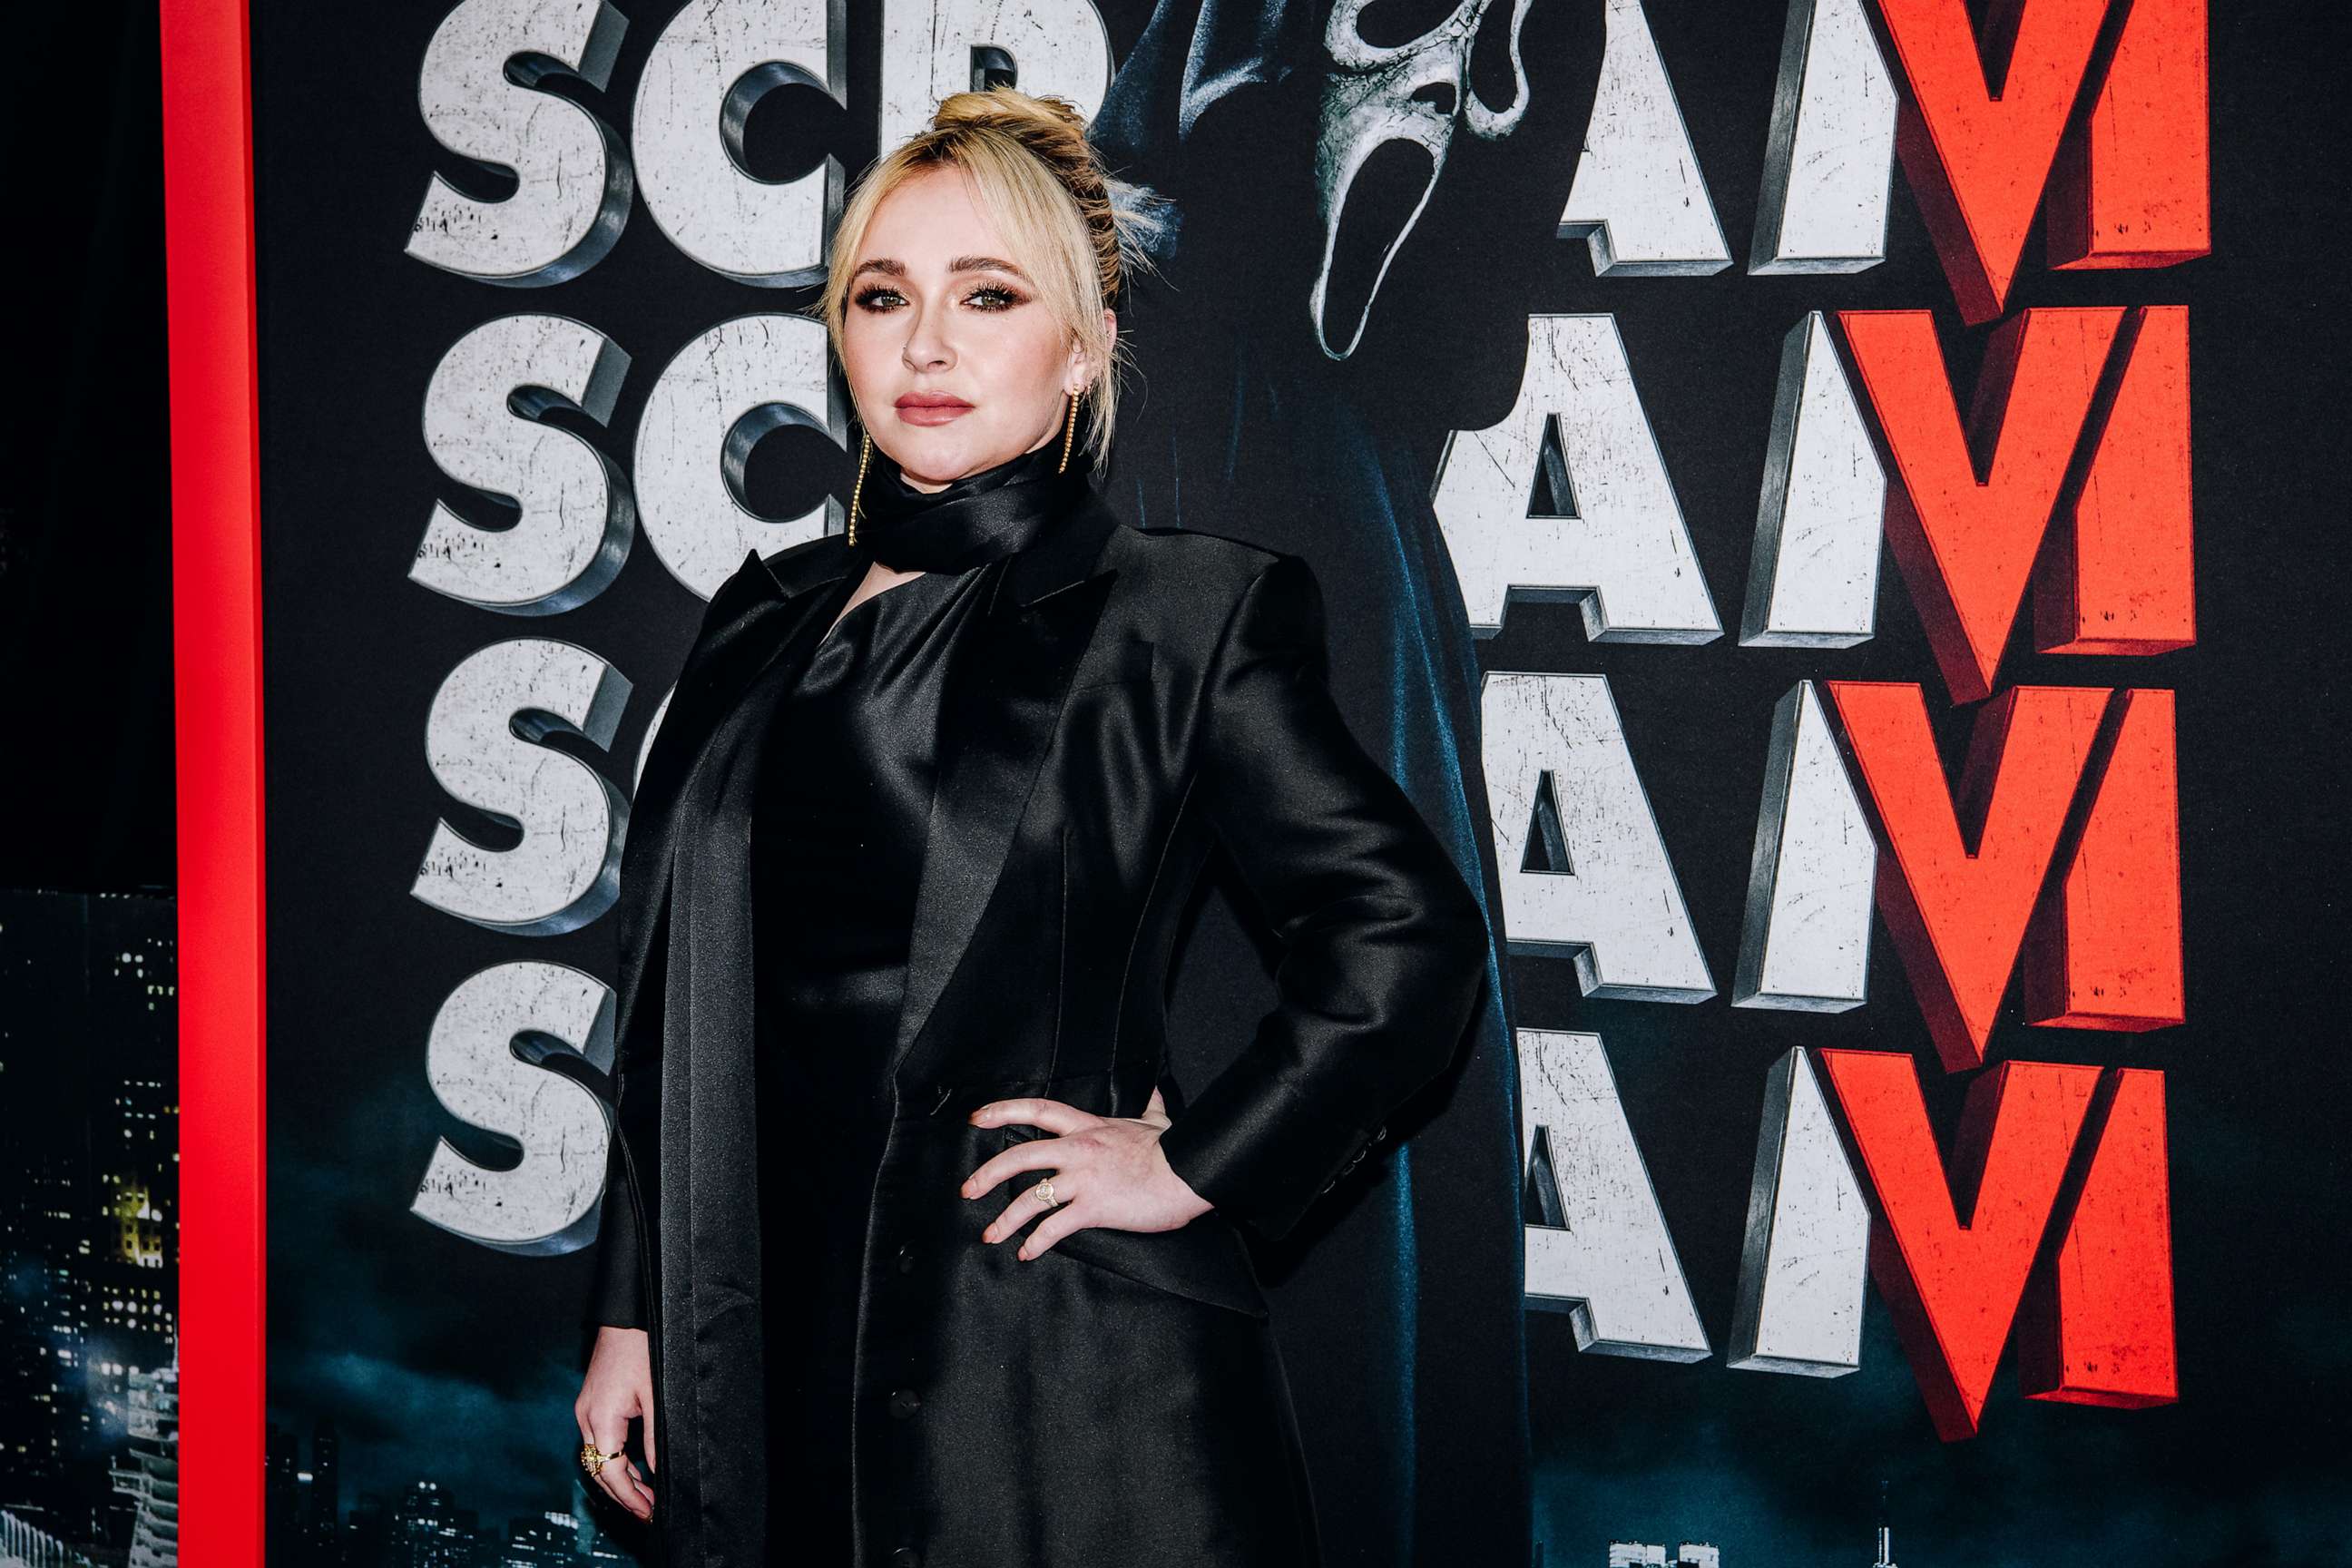 PHOTO: Hayden Panettiere arrives at the premiere of "Scream VI" held at AMC Lincoln Square, March 6, 2023, in New York.